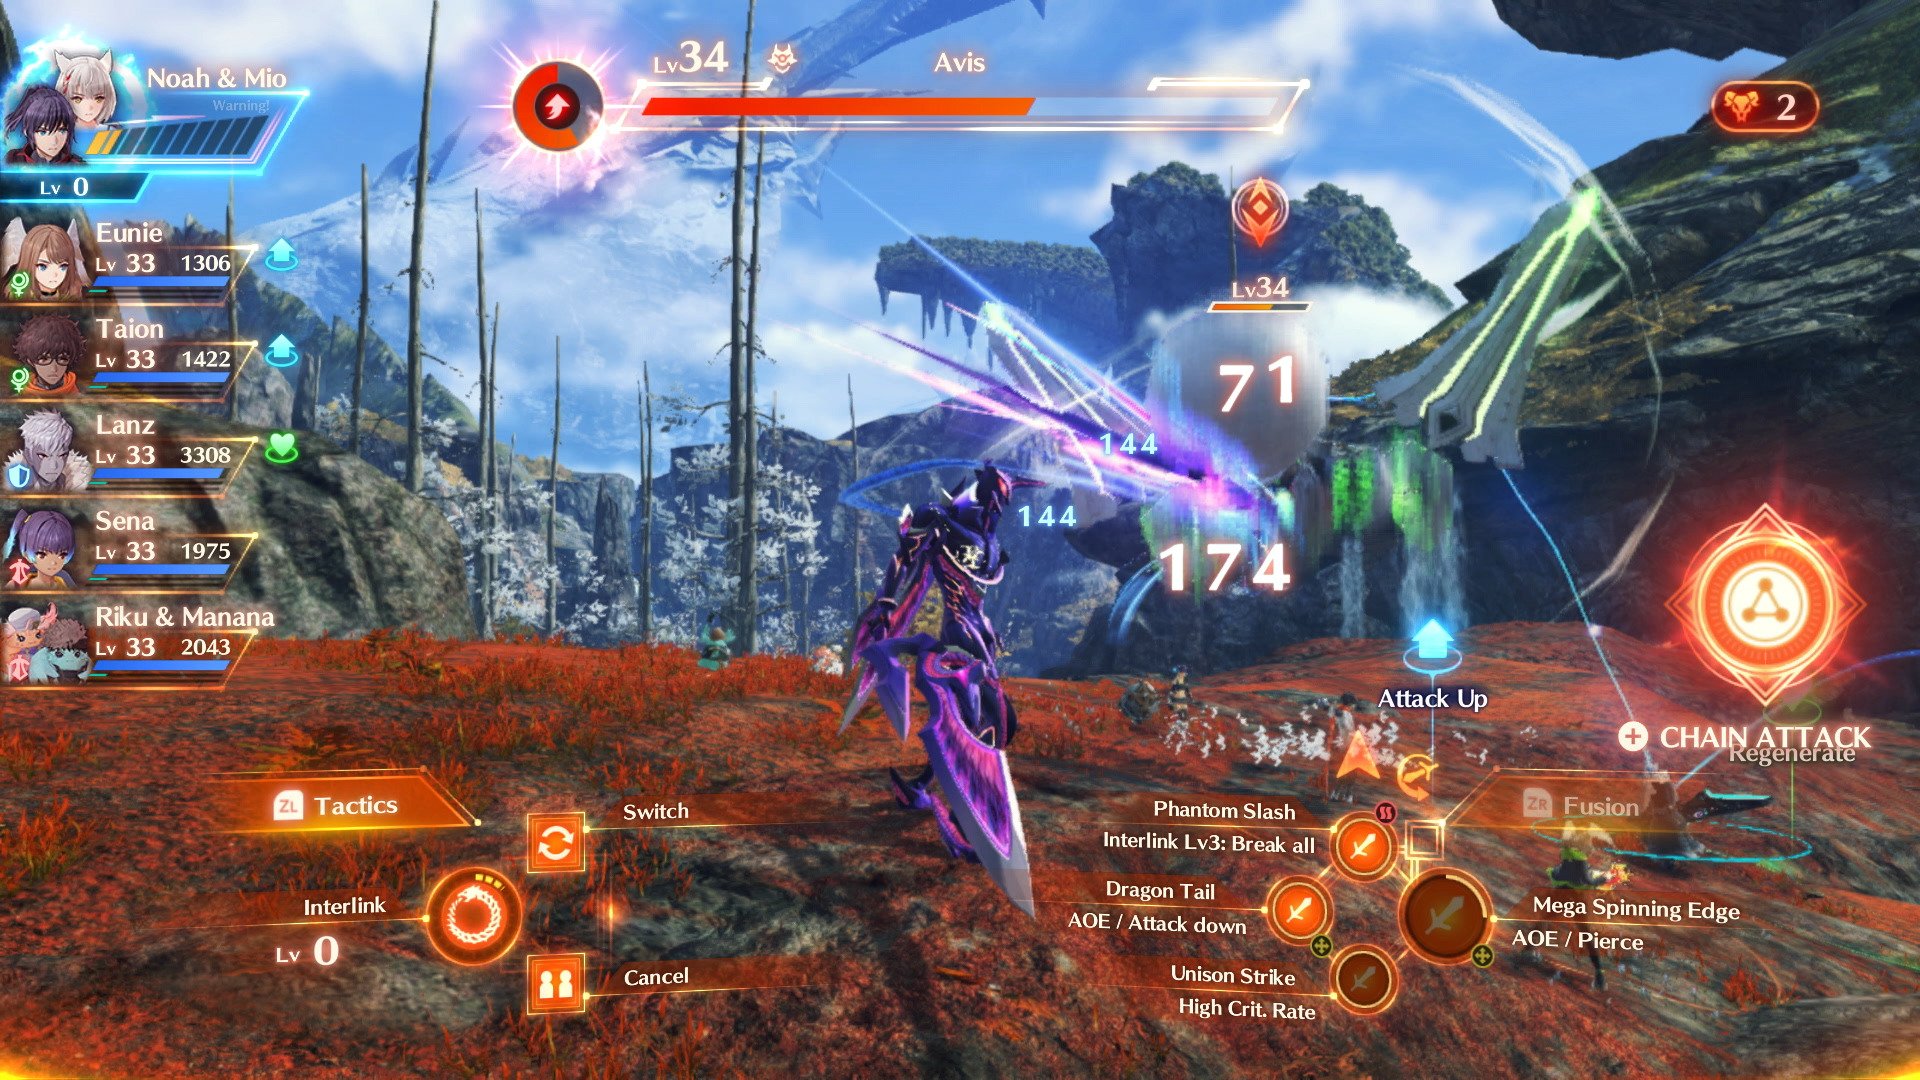 Xenoblade Chronicles 3 for Nintendo Switch review: A massive tale